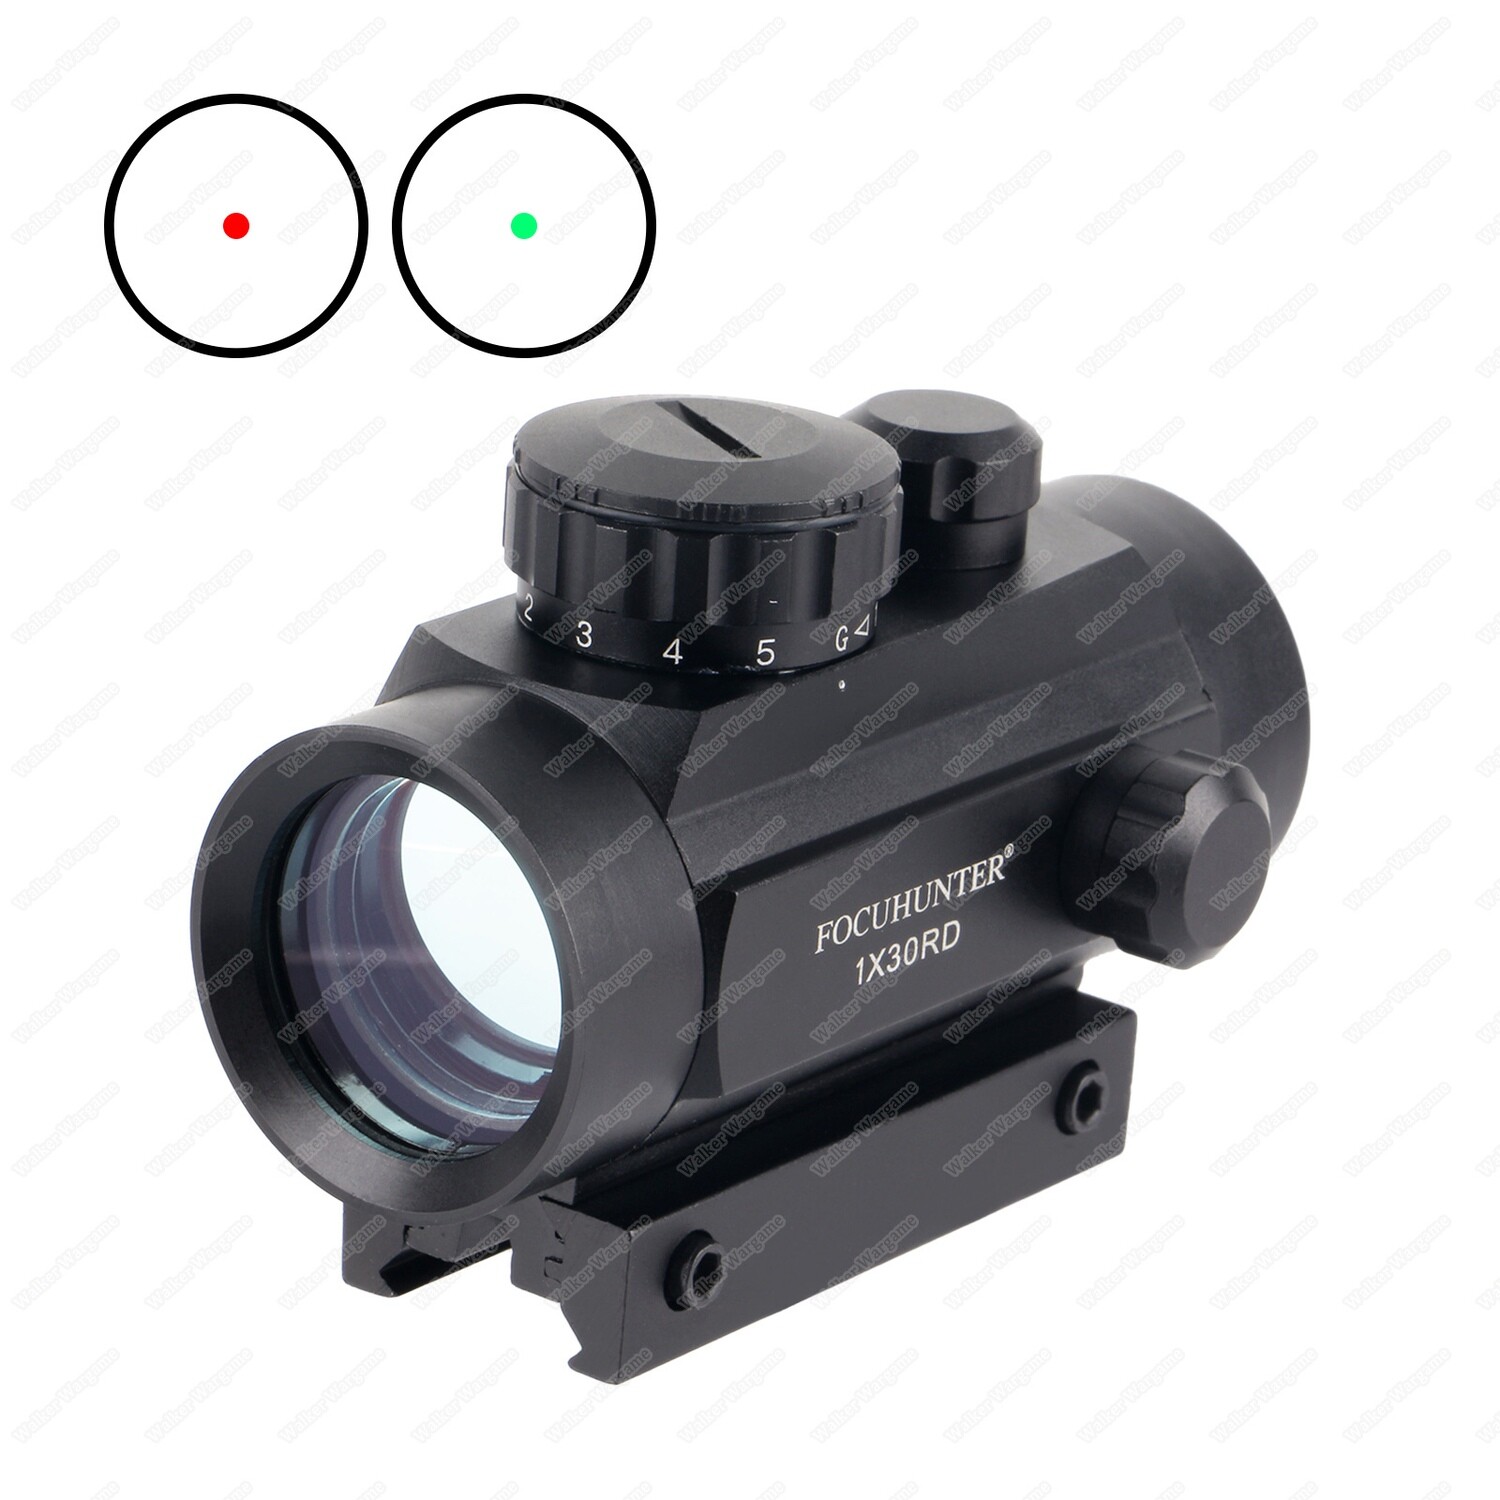 1x30 Illuminated Red Green Dot Sight for 11mm 20mm Dovetail Picatinny Rail 0103